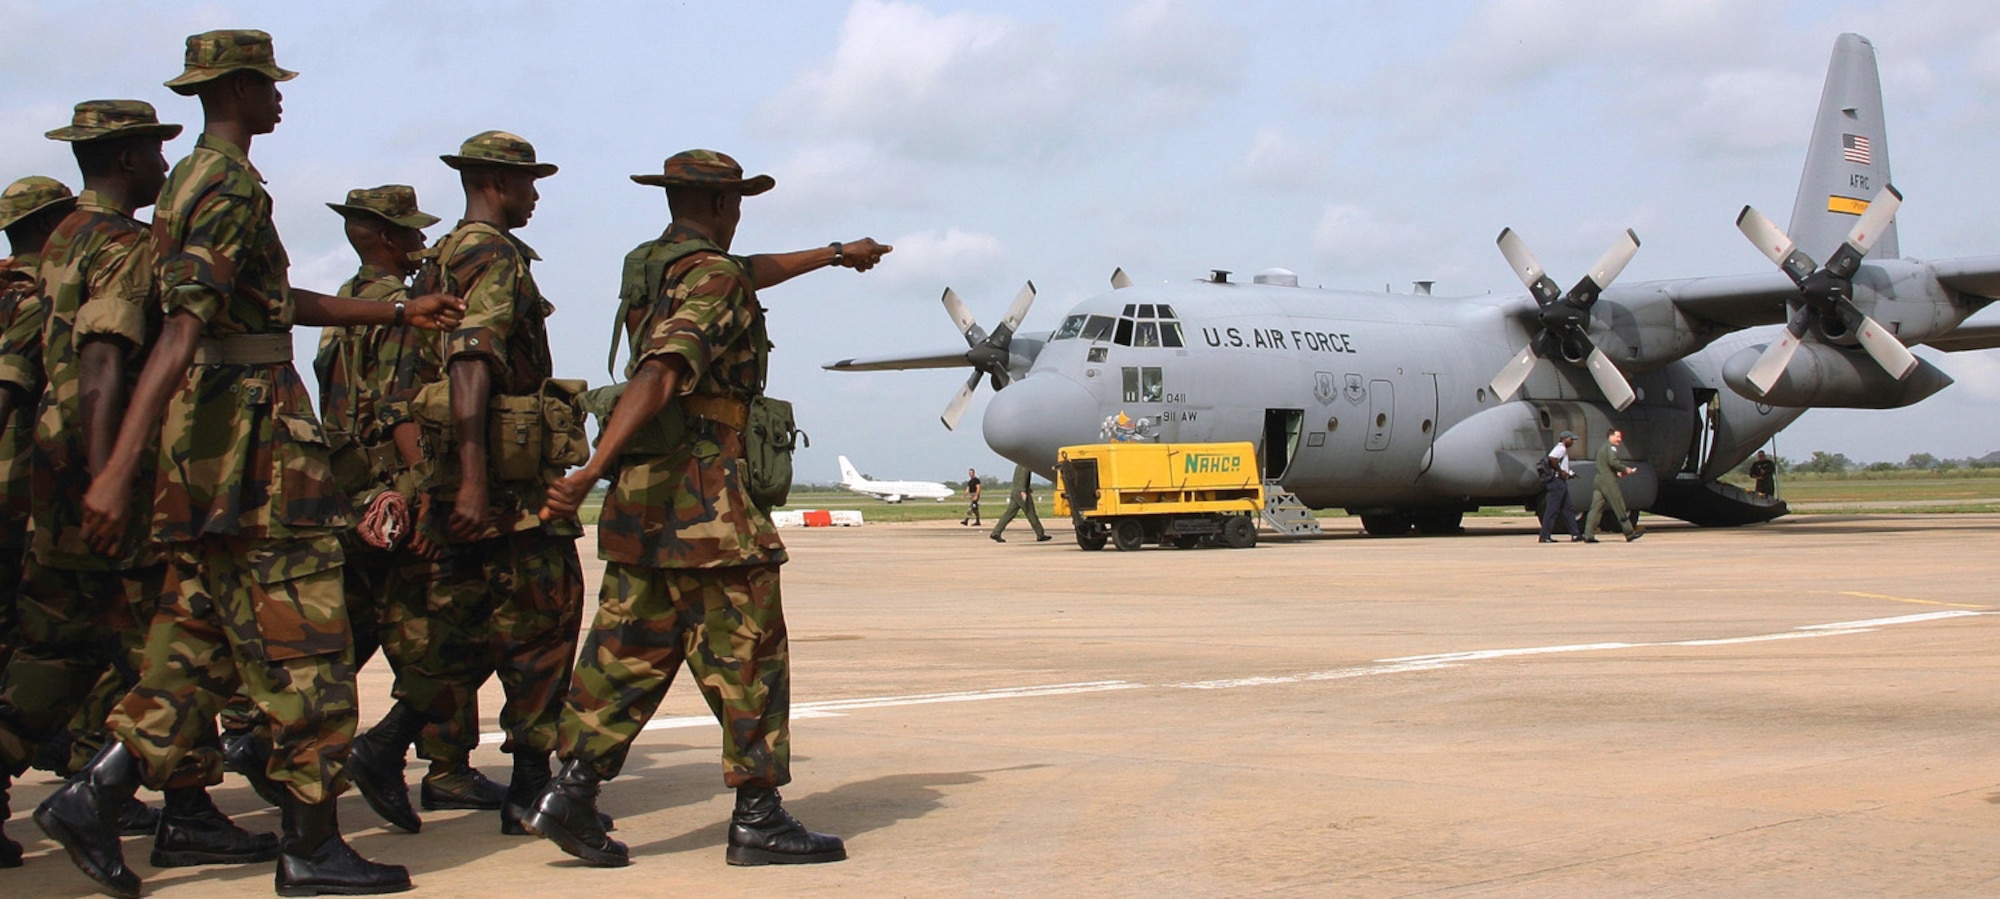 ABUJA, Nigeria -- Nigerian troops march toward an Air Force C-130 Hercules.  The aircraft flew them to the Sudan on Oct. 28.  President Bush sent two C-130s to the African Union to help reduce the humanitarian crisis in the Darfur region.  (U.S. Air Force photo by 1st Lt. John Beach)